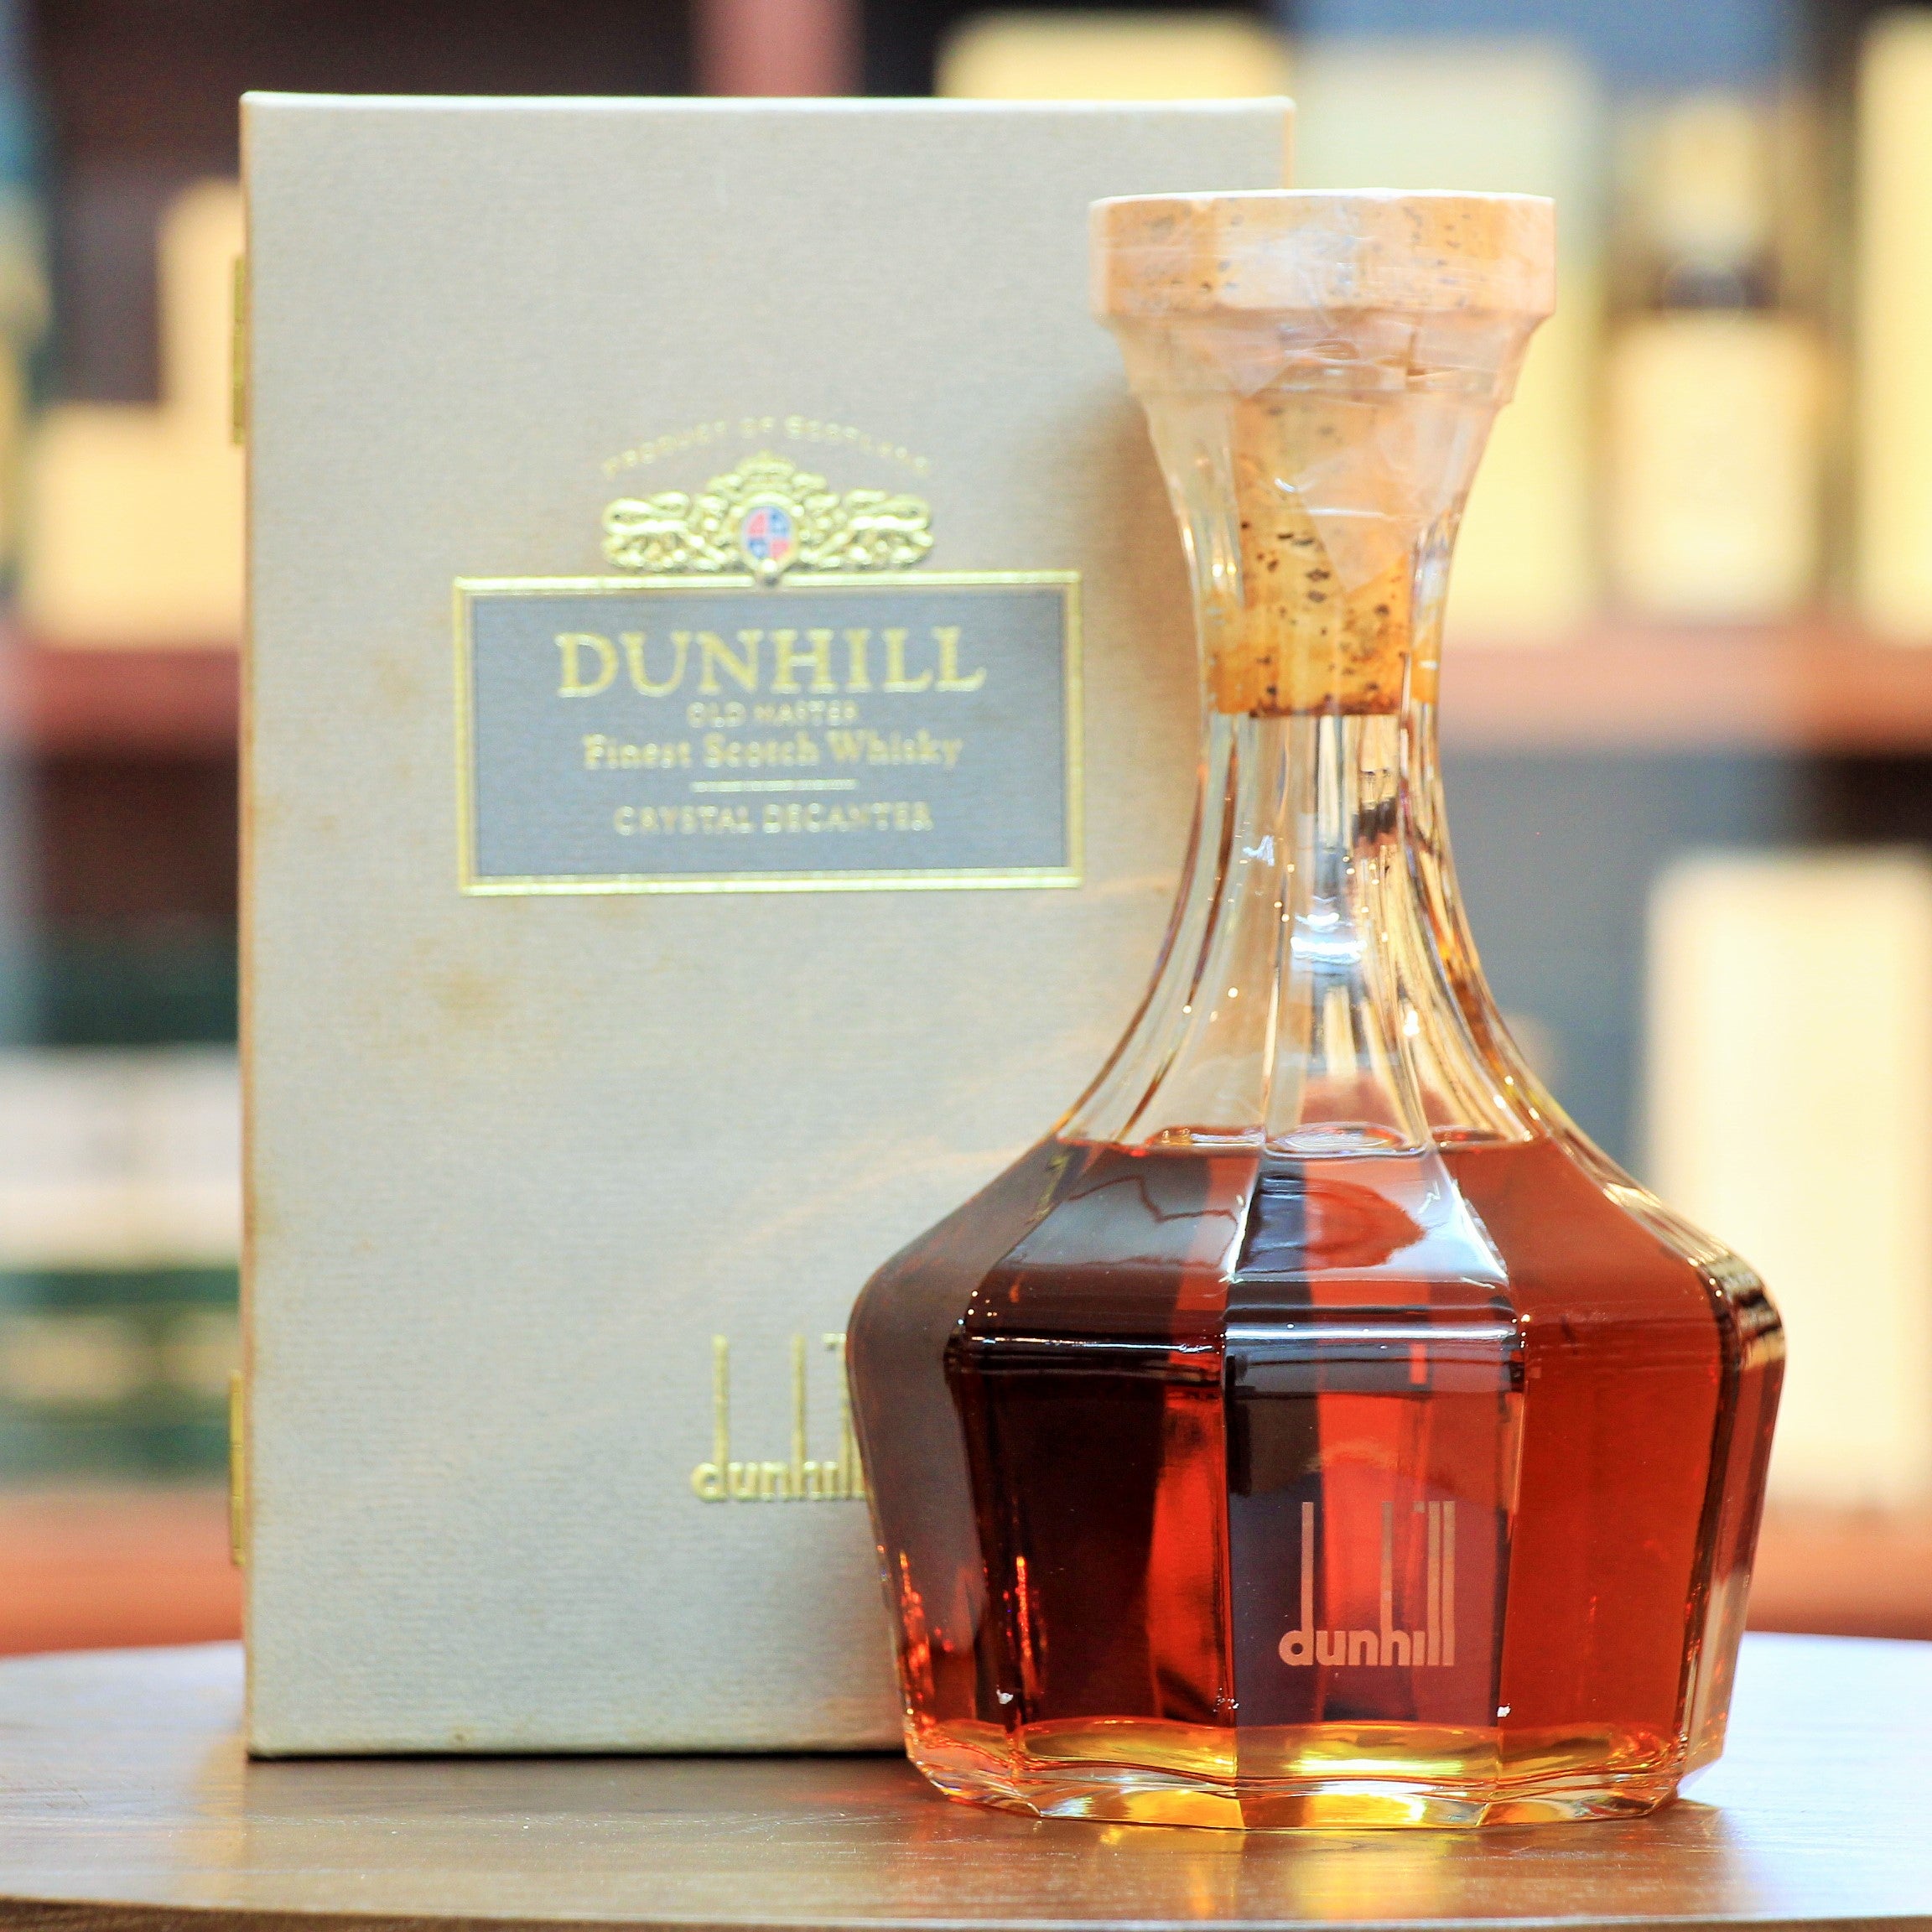 Dunhill Old Master Crystal Decanter, Since it first appeared, this old bottling is reported to include a blend of 8 years (the youngest grain) to over 20 years (the oldest malt).